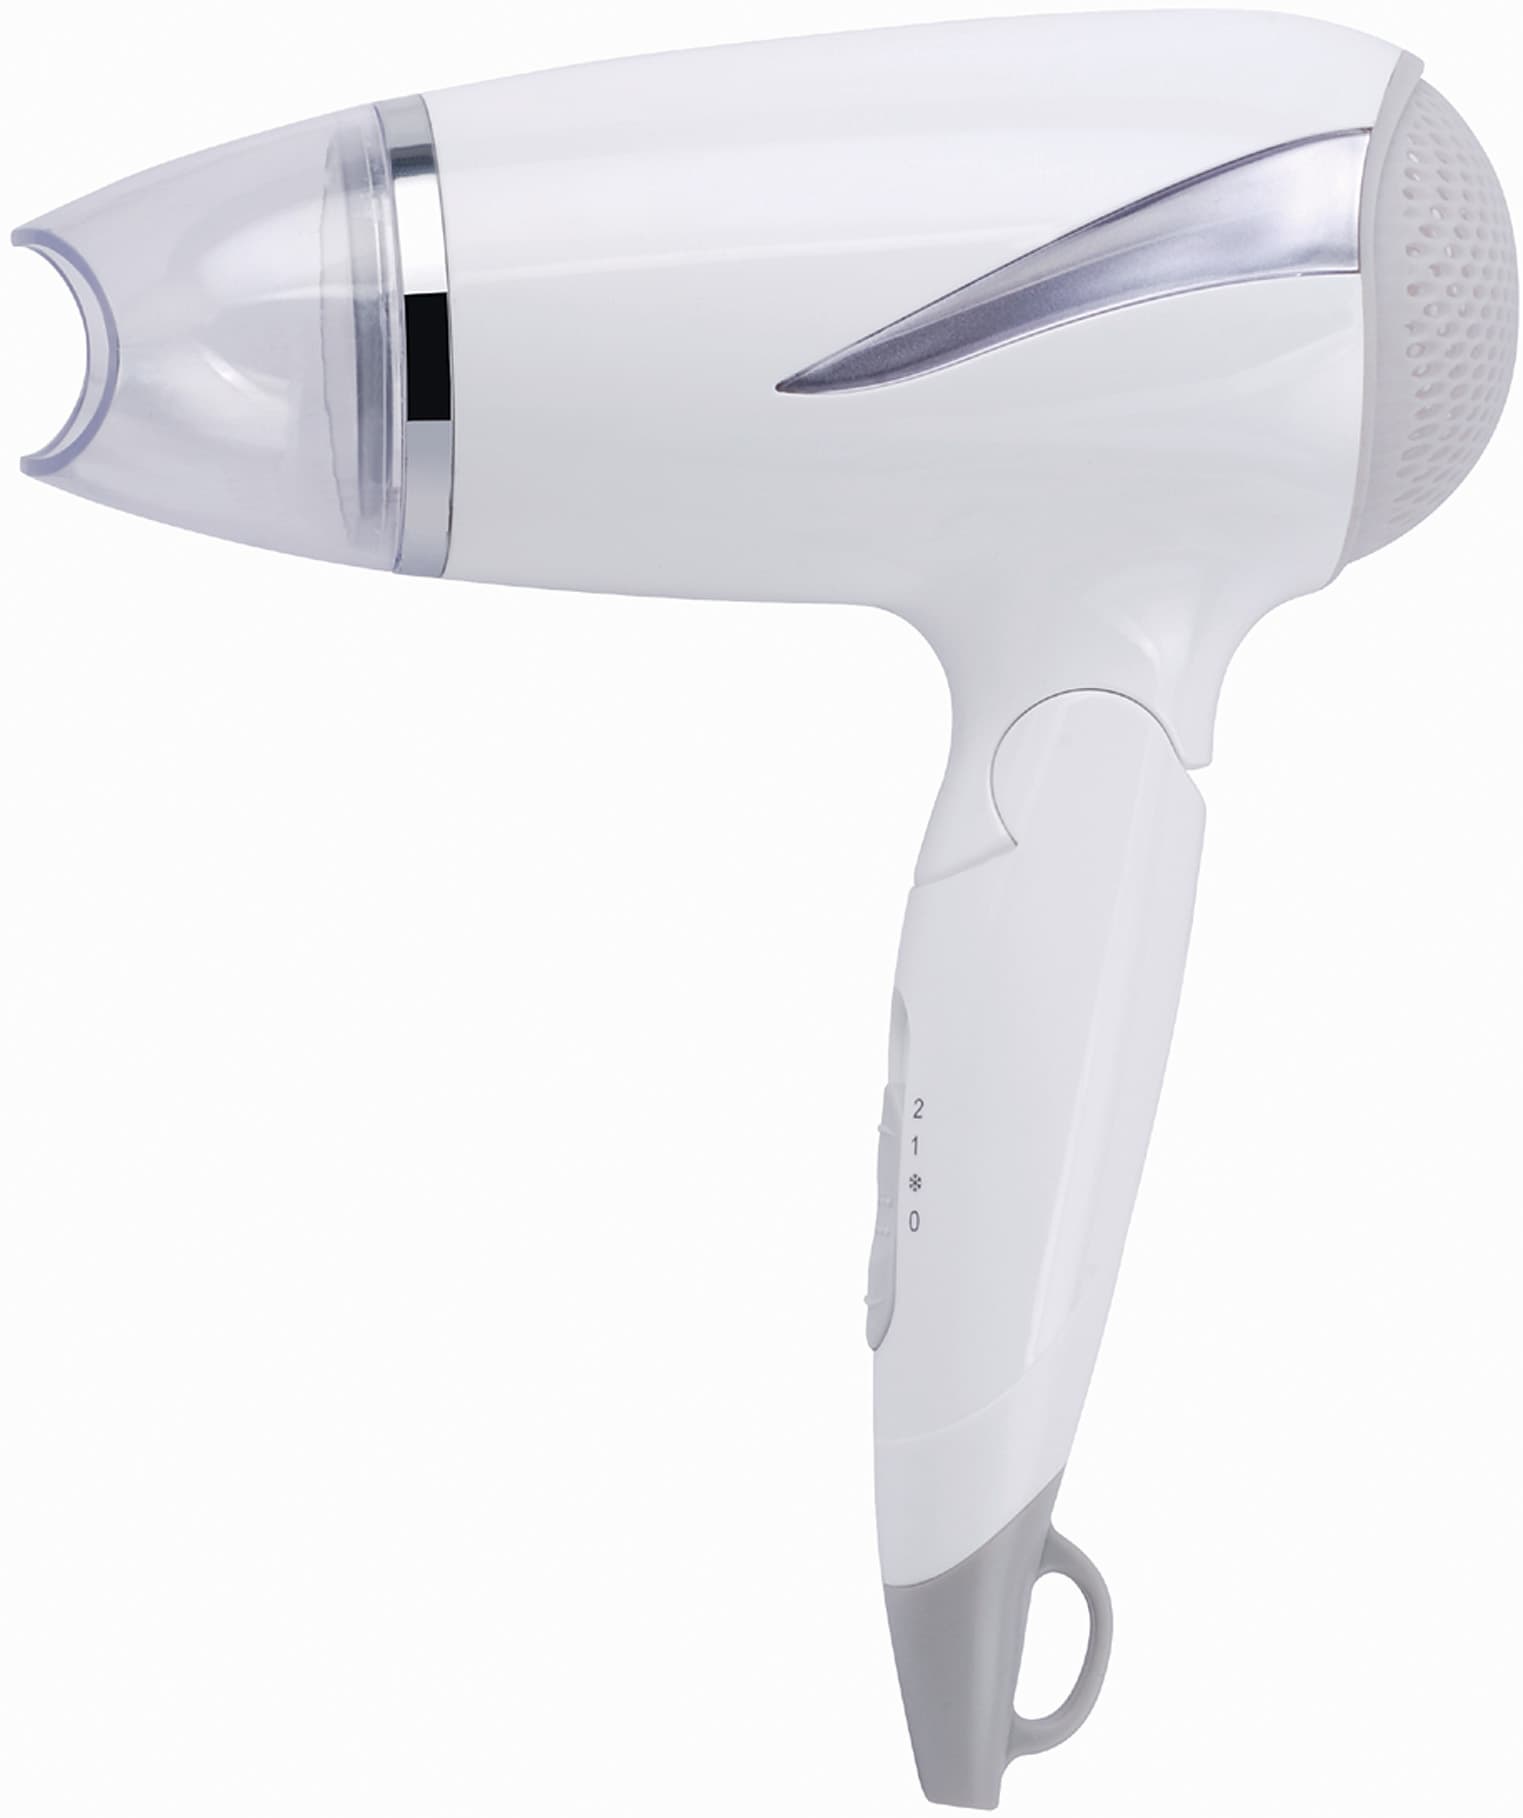 RCY2029A 1200w Hotel/Travel Ionic Hair Dryer